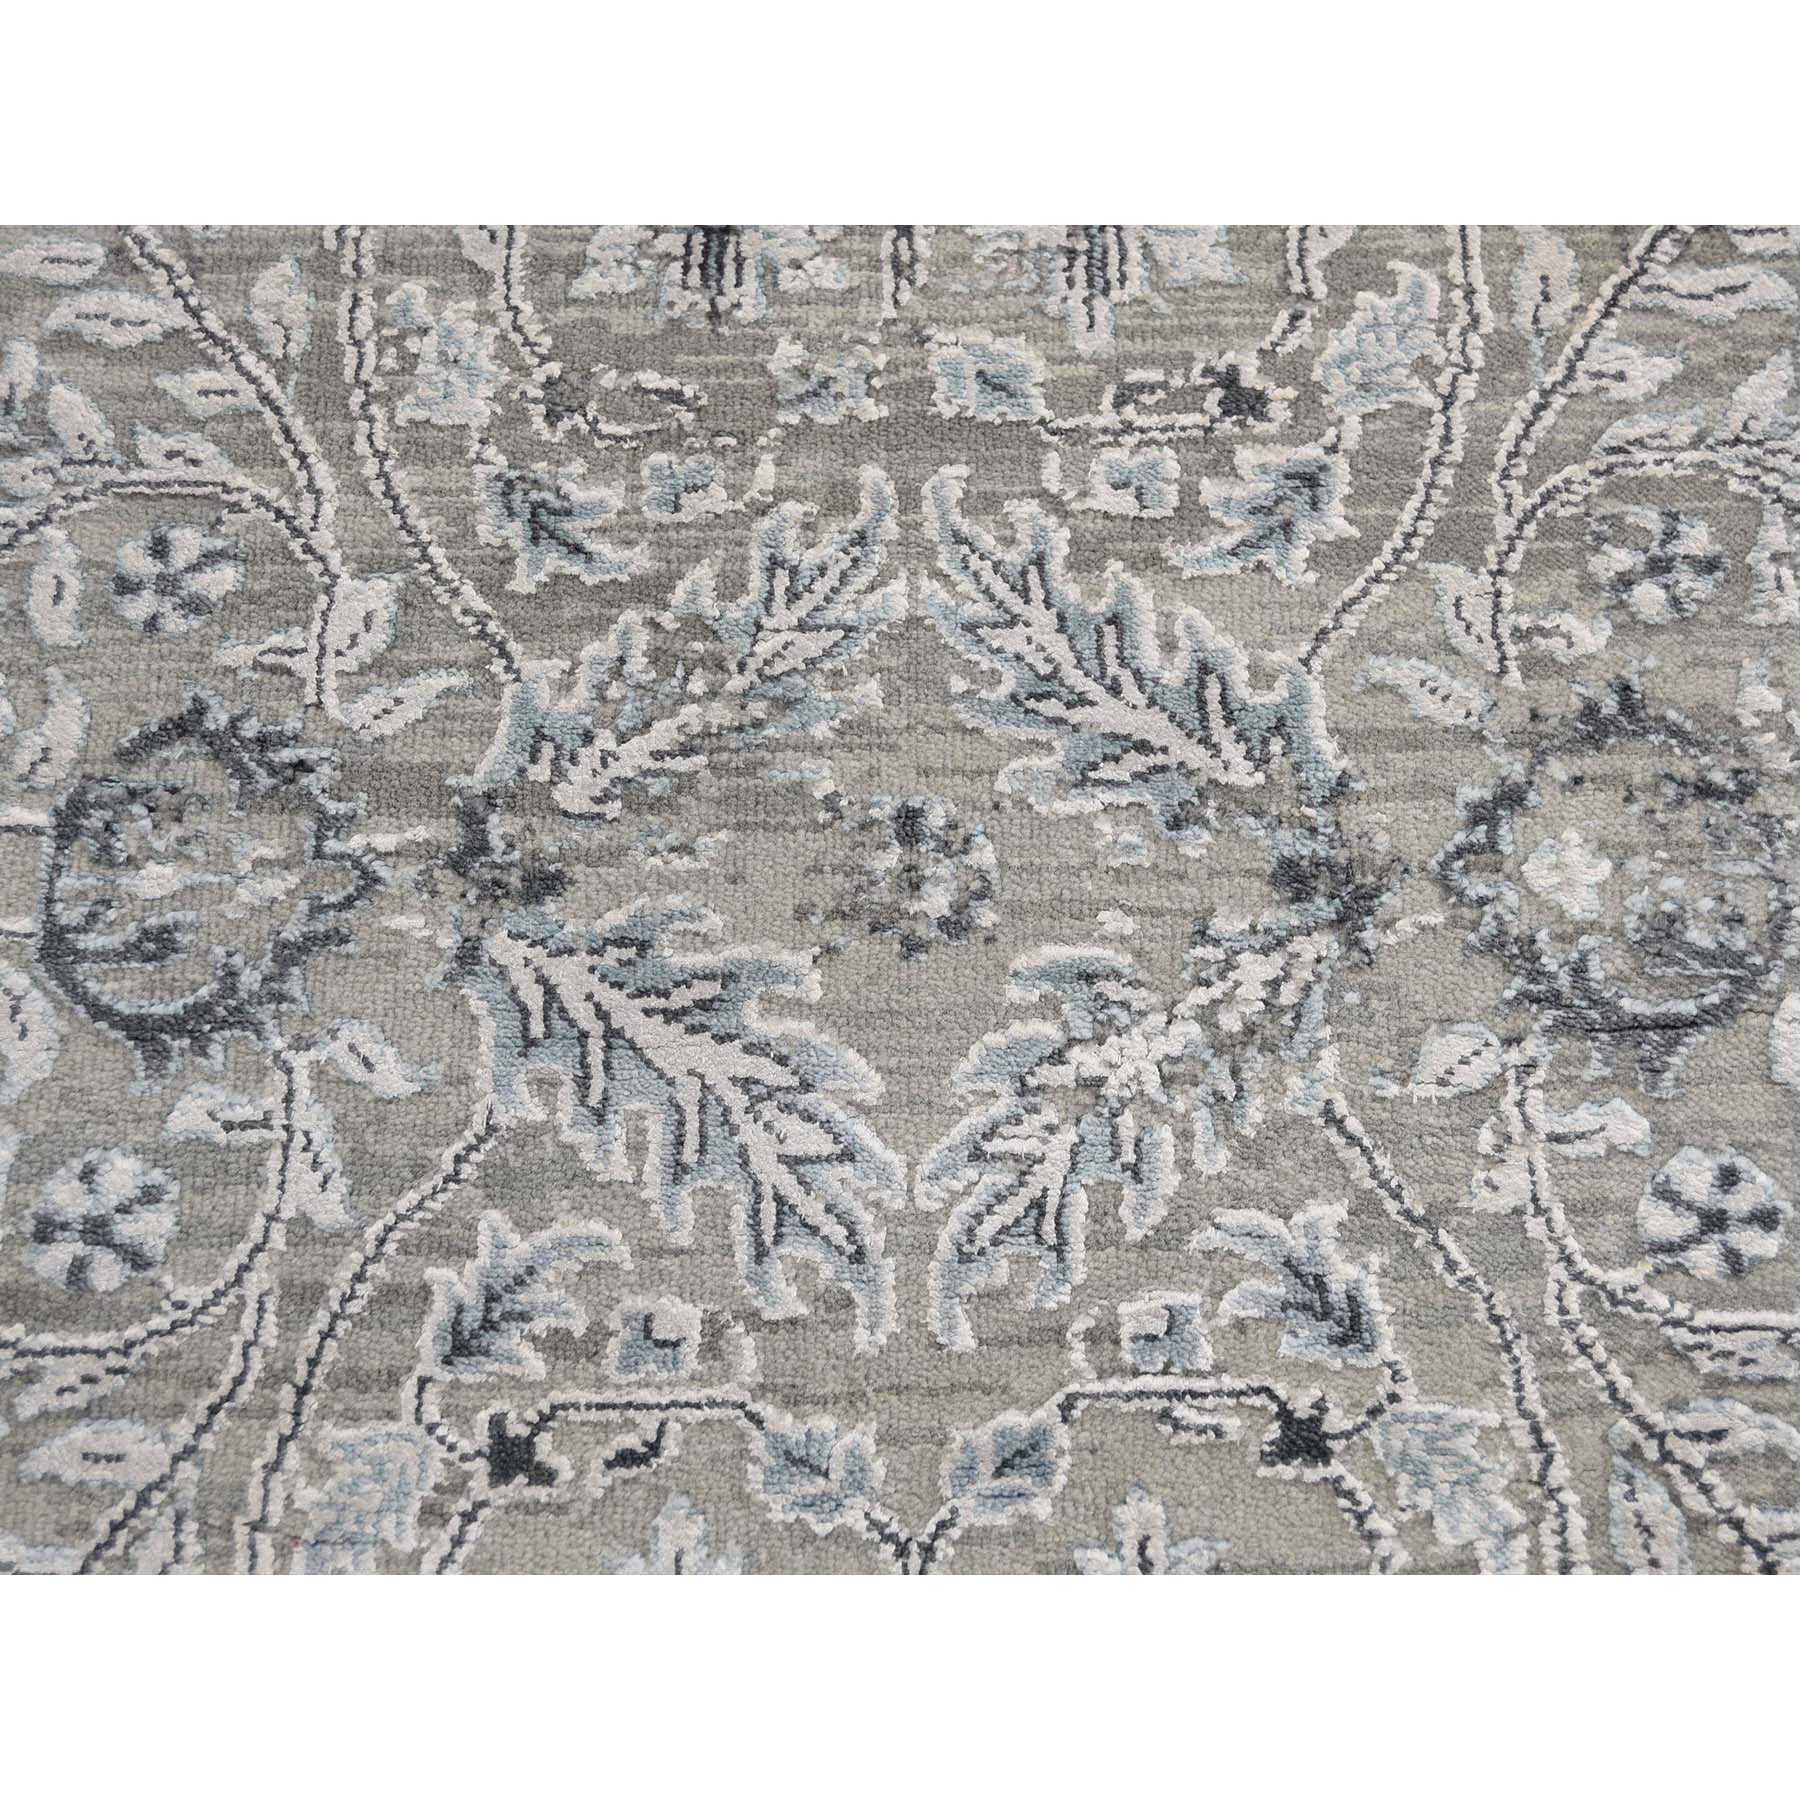 6-1 x9- Grey Transitional Kashan Design with Wool and Silk Hand Knotted Rug 